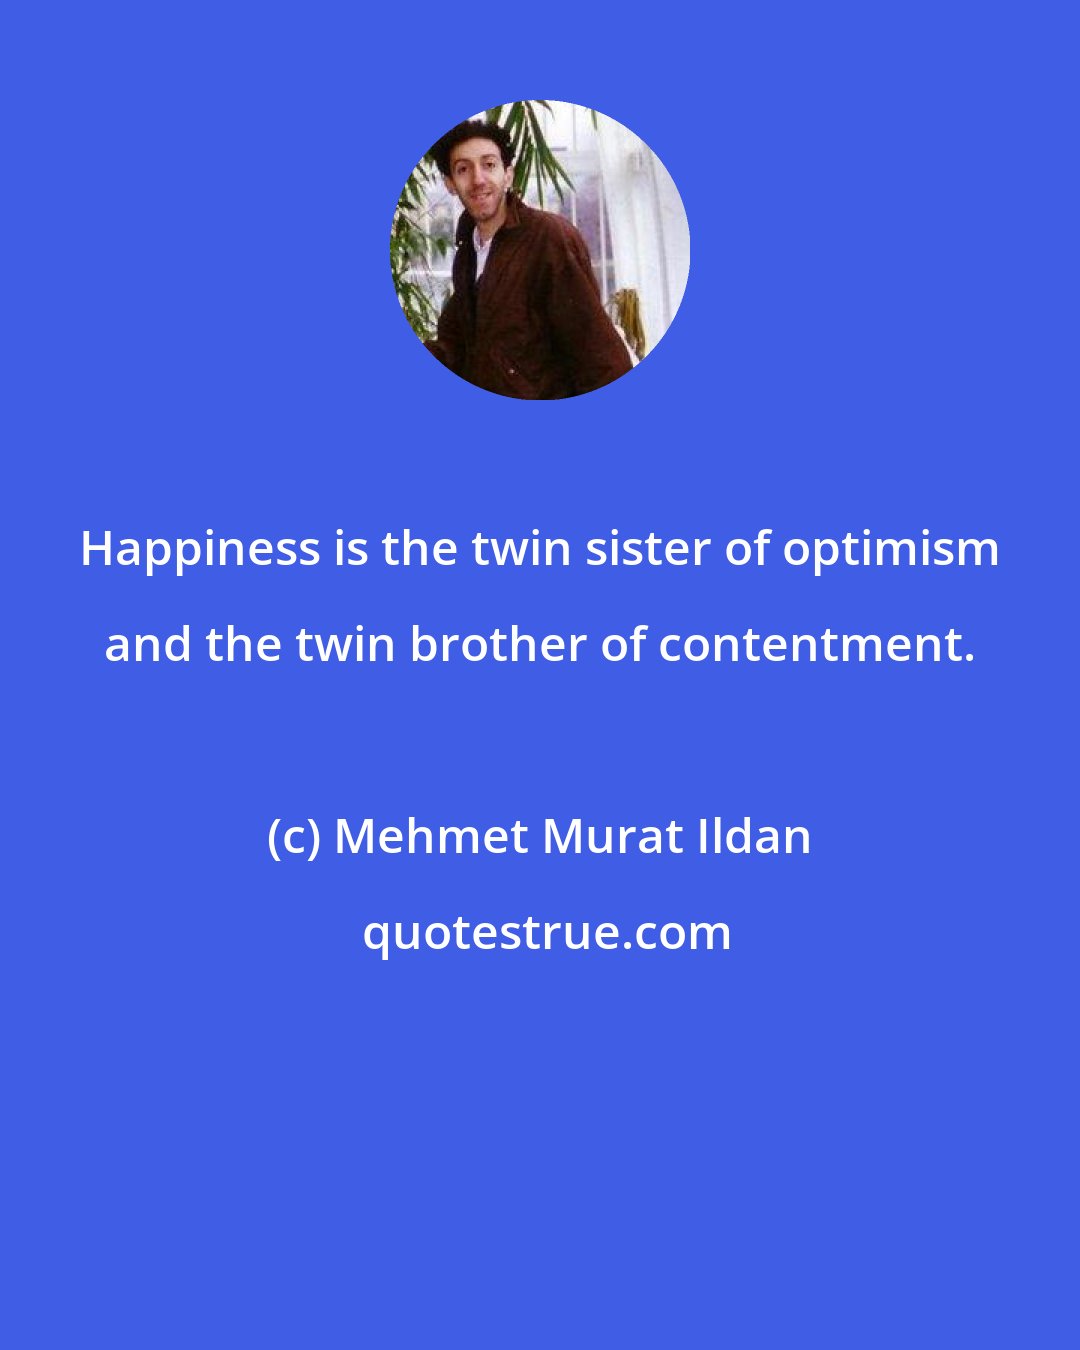 Mehmet Murat Ildan: Happiness is the twin sister of optimism and the twin brother of contentment.